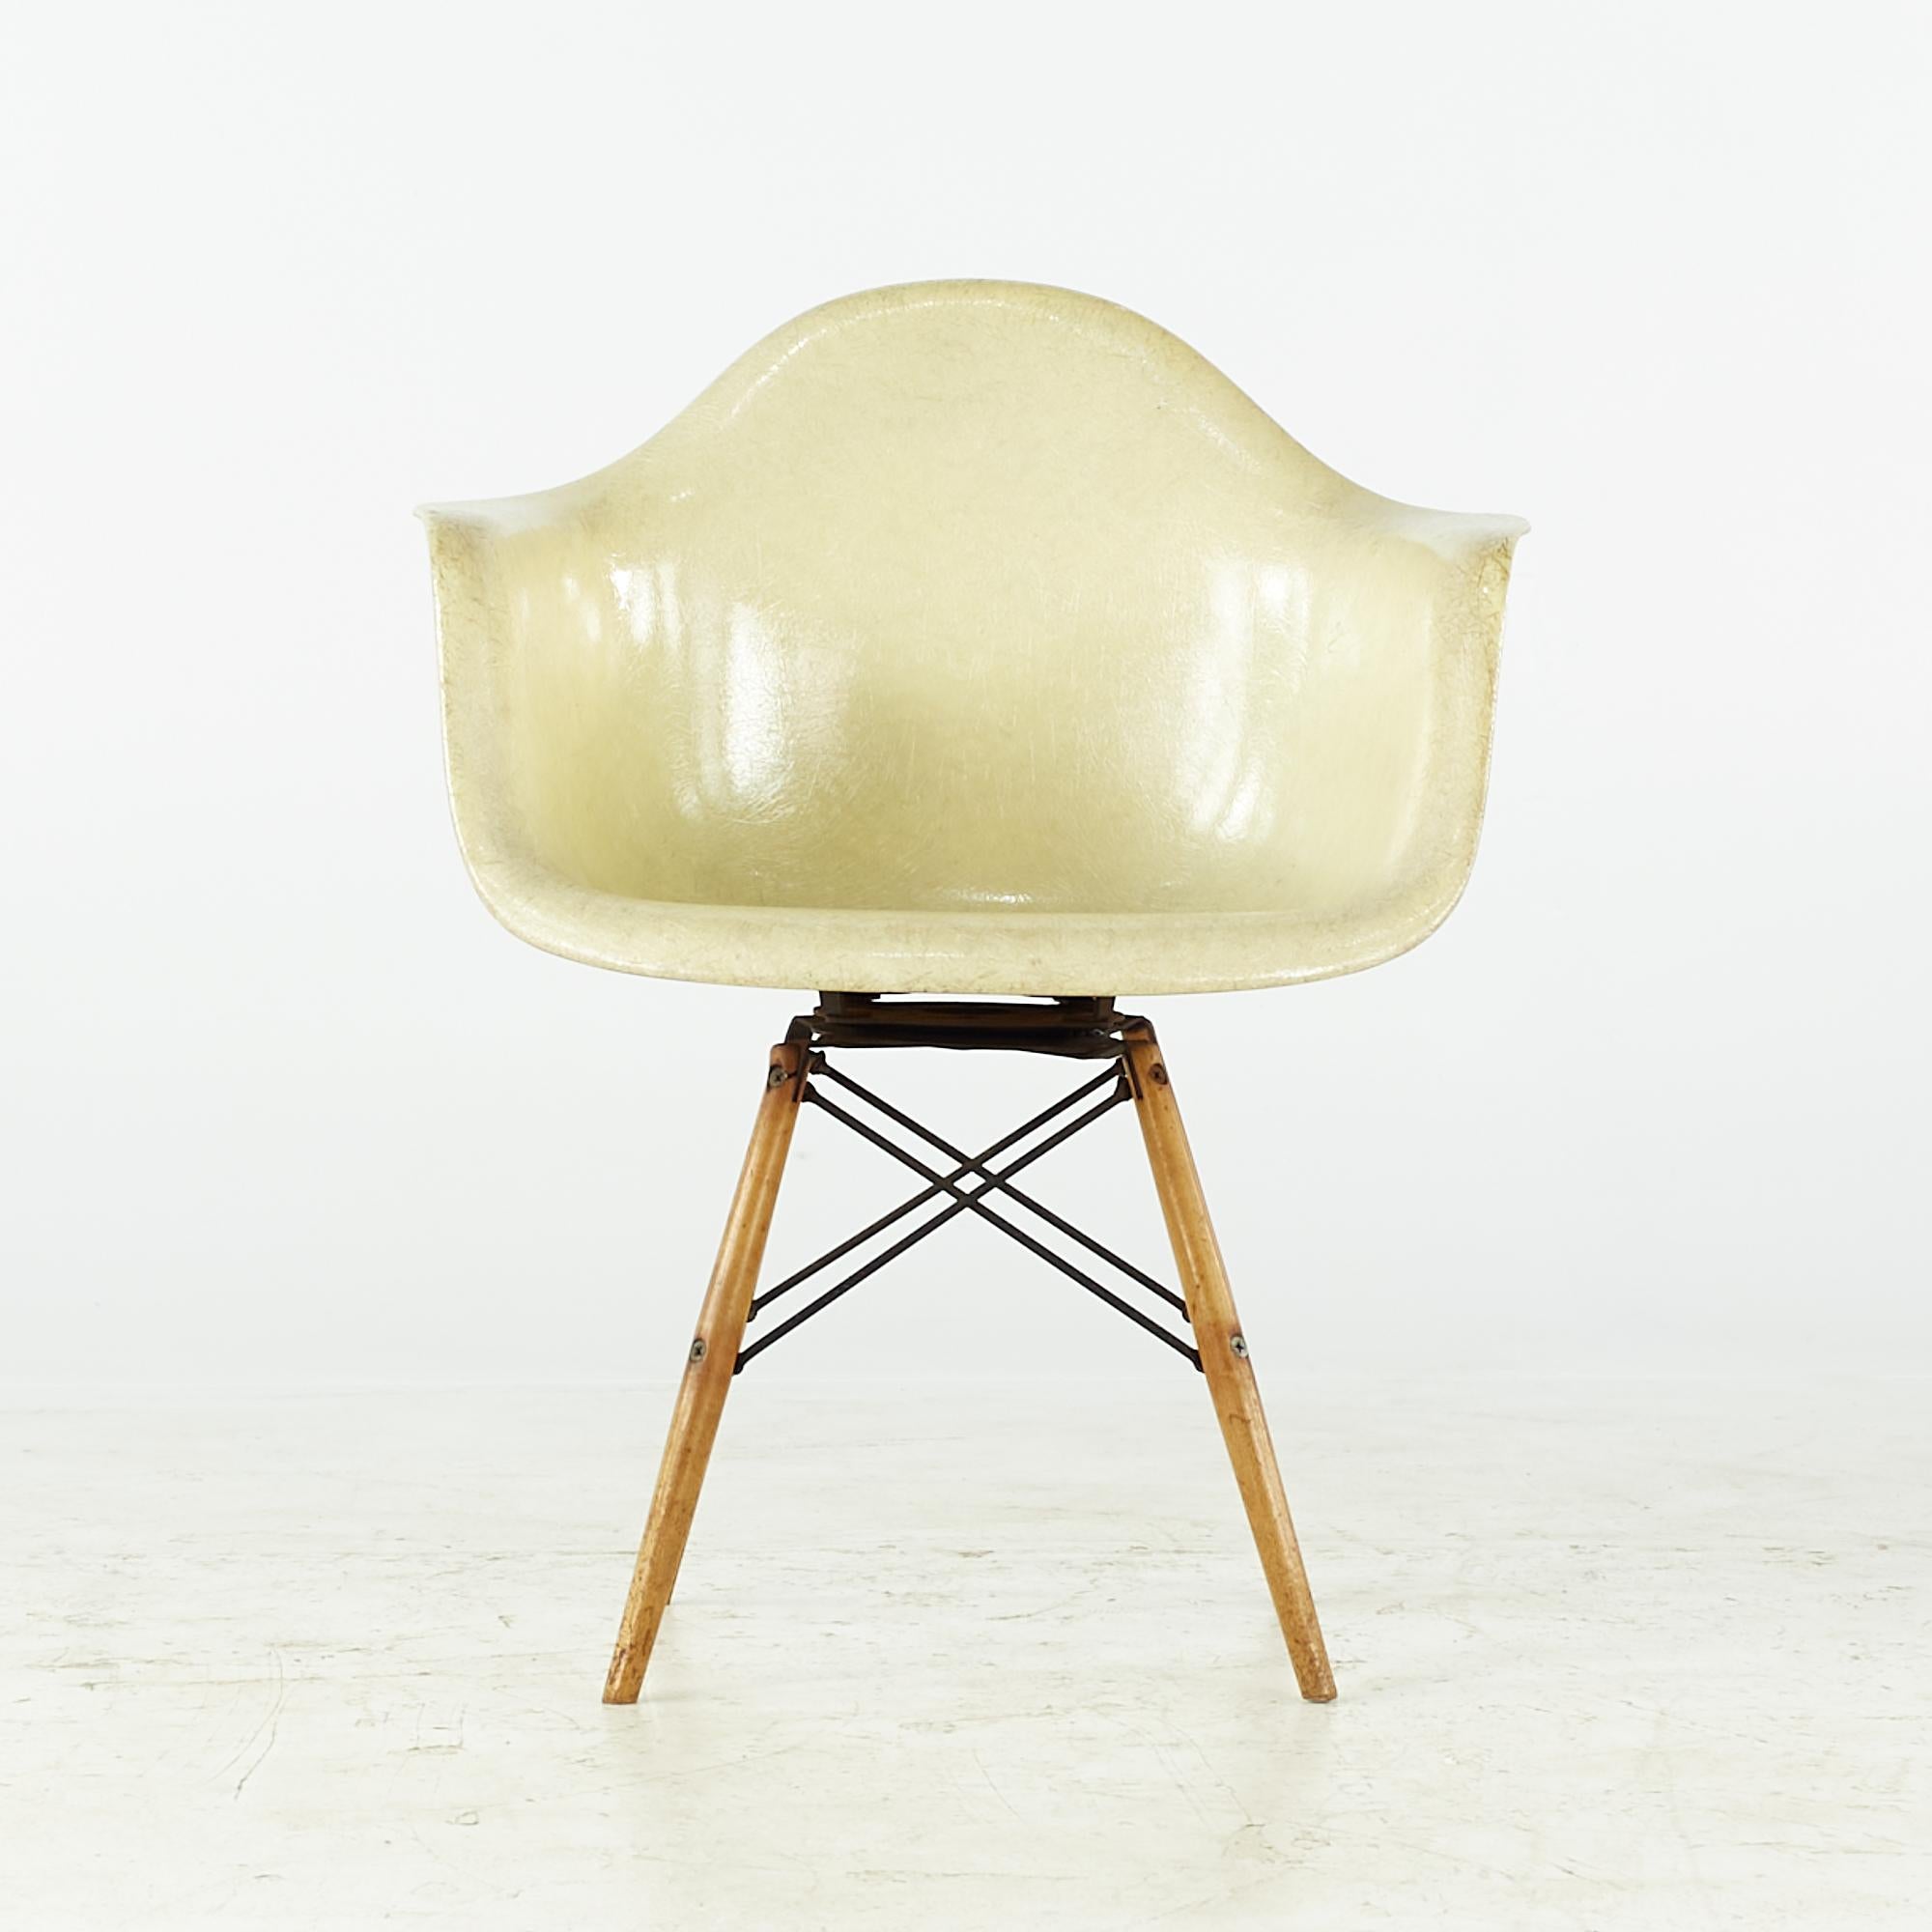 Early Charles and Ray Eames for Herman Miller midcentury rope edge armchair

This chair measures: 24.5 wide x 22 deep x 31 inches high, with a seat height of 16 and arm height/chair clearance of 25 inches

All pieces of furniture can be had in